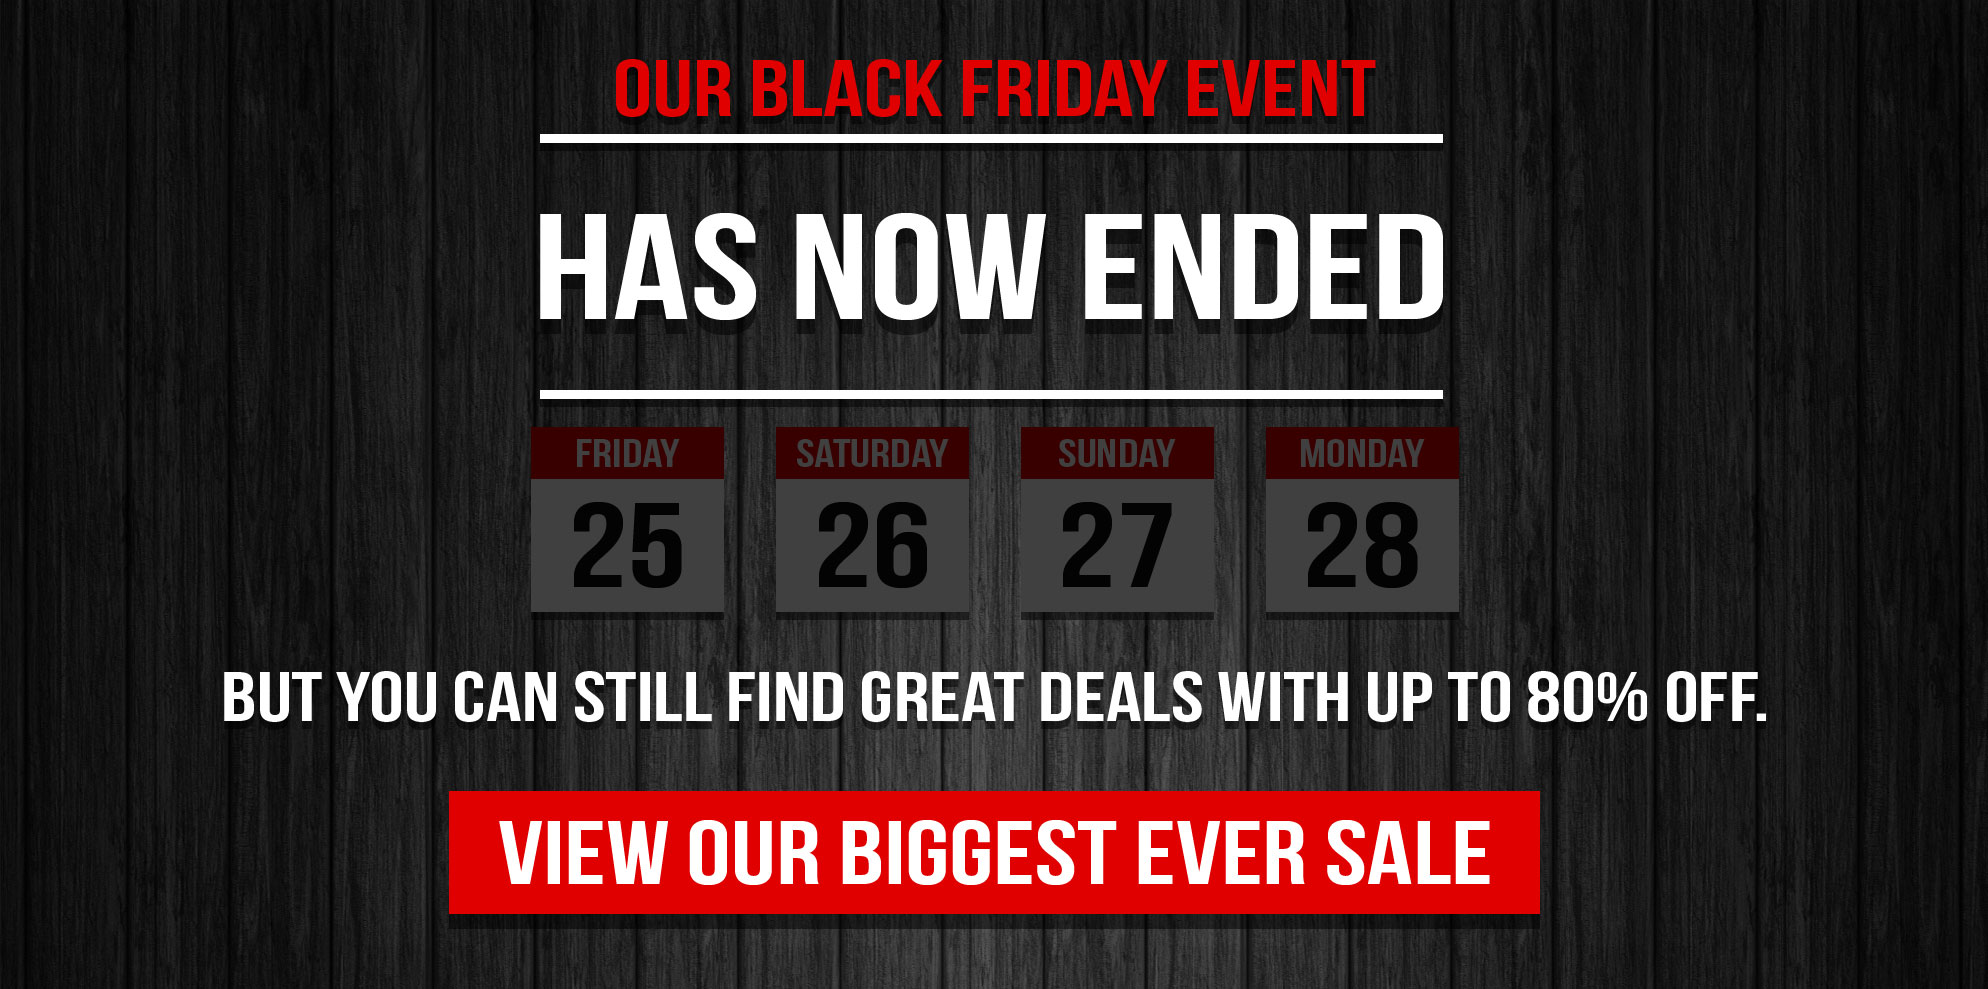 Black Friday Event Has Now Ended